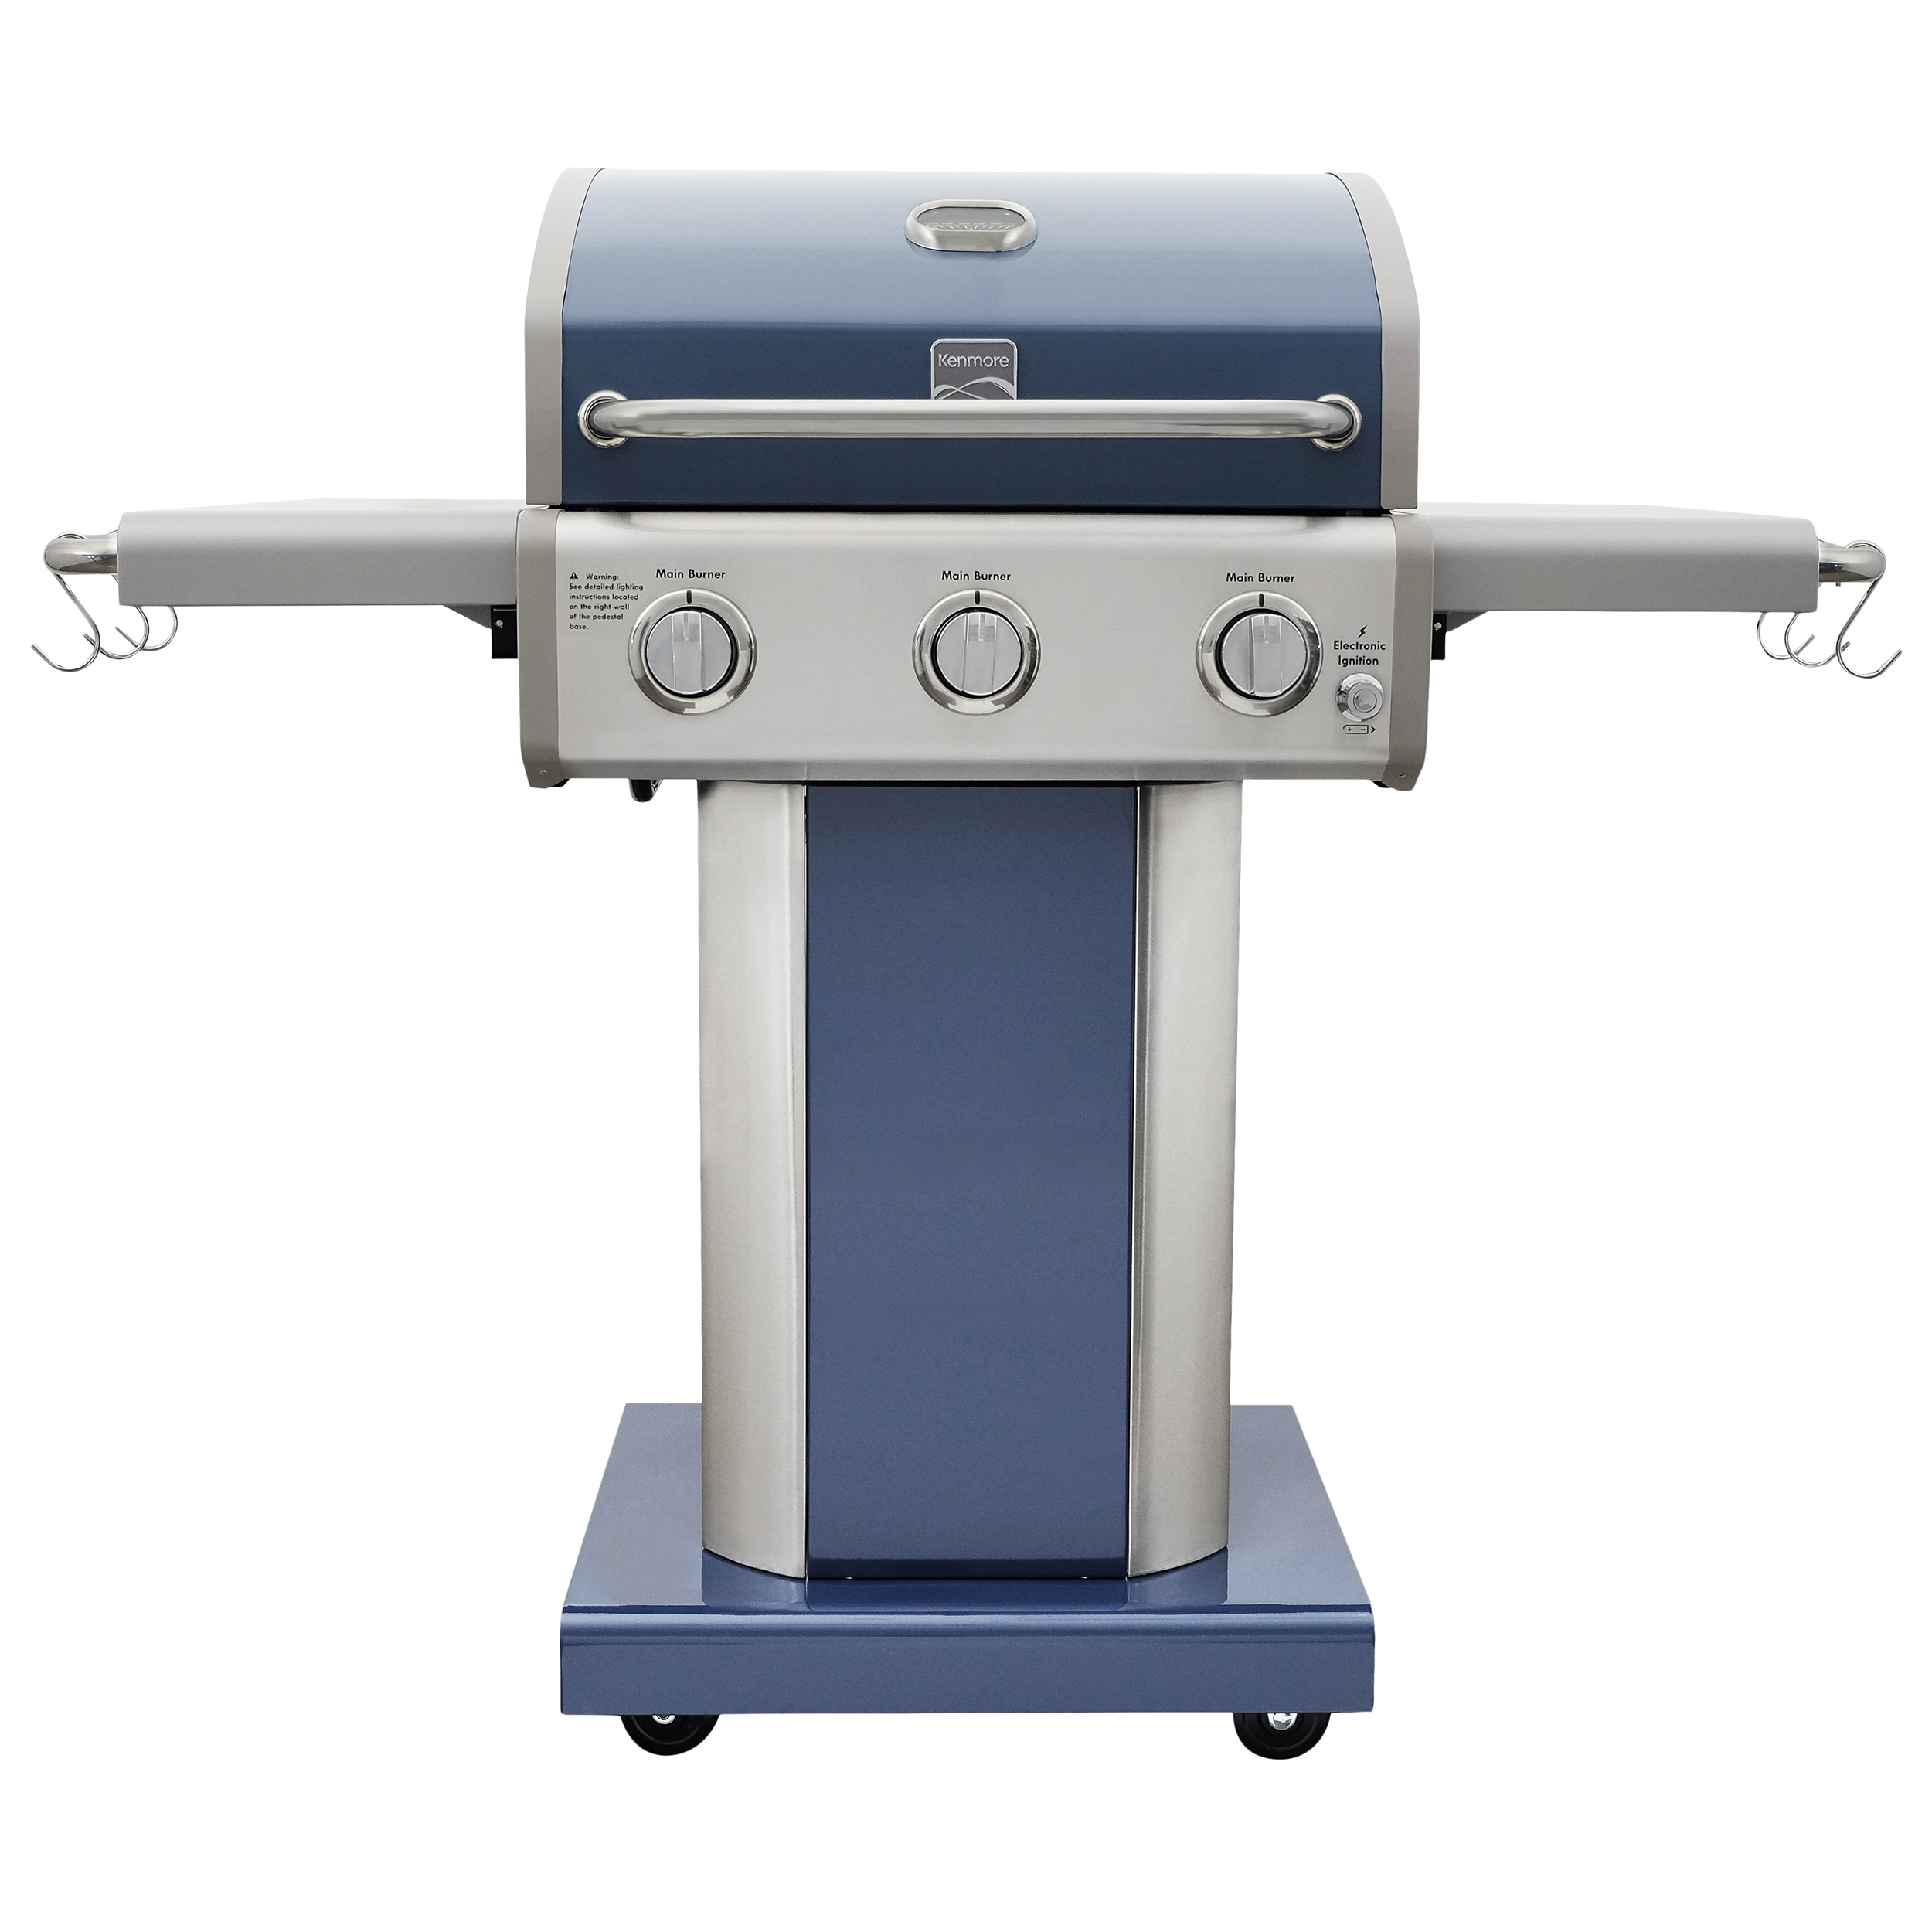 Kenmore 3-Burner Gas Grill, Outdoor BBQ Grill, Propane Grill with Foldable Side Tables, Azure Blue - image 1 of 12